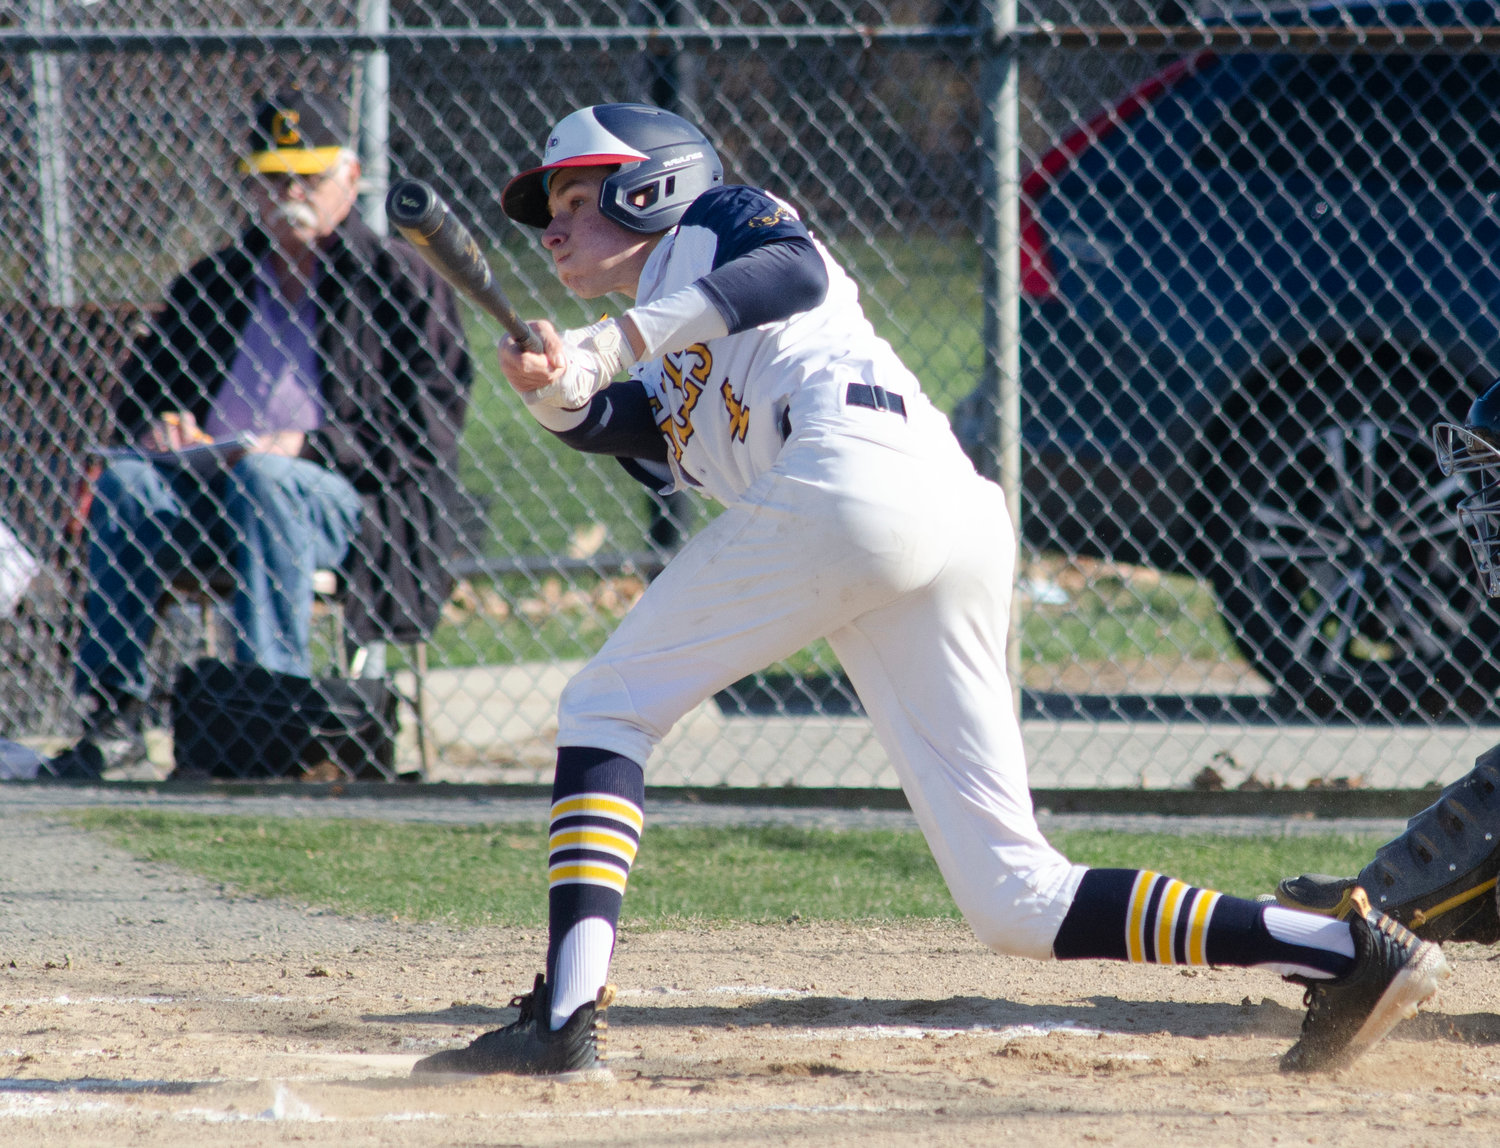 Gabe Tanous, shown in the league-opener, had a single in the Eagles' 5-0 win over Central on Friday.